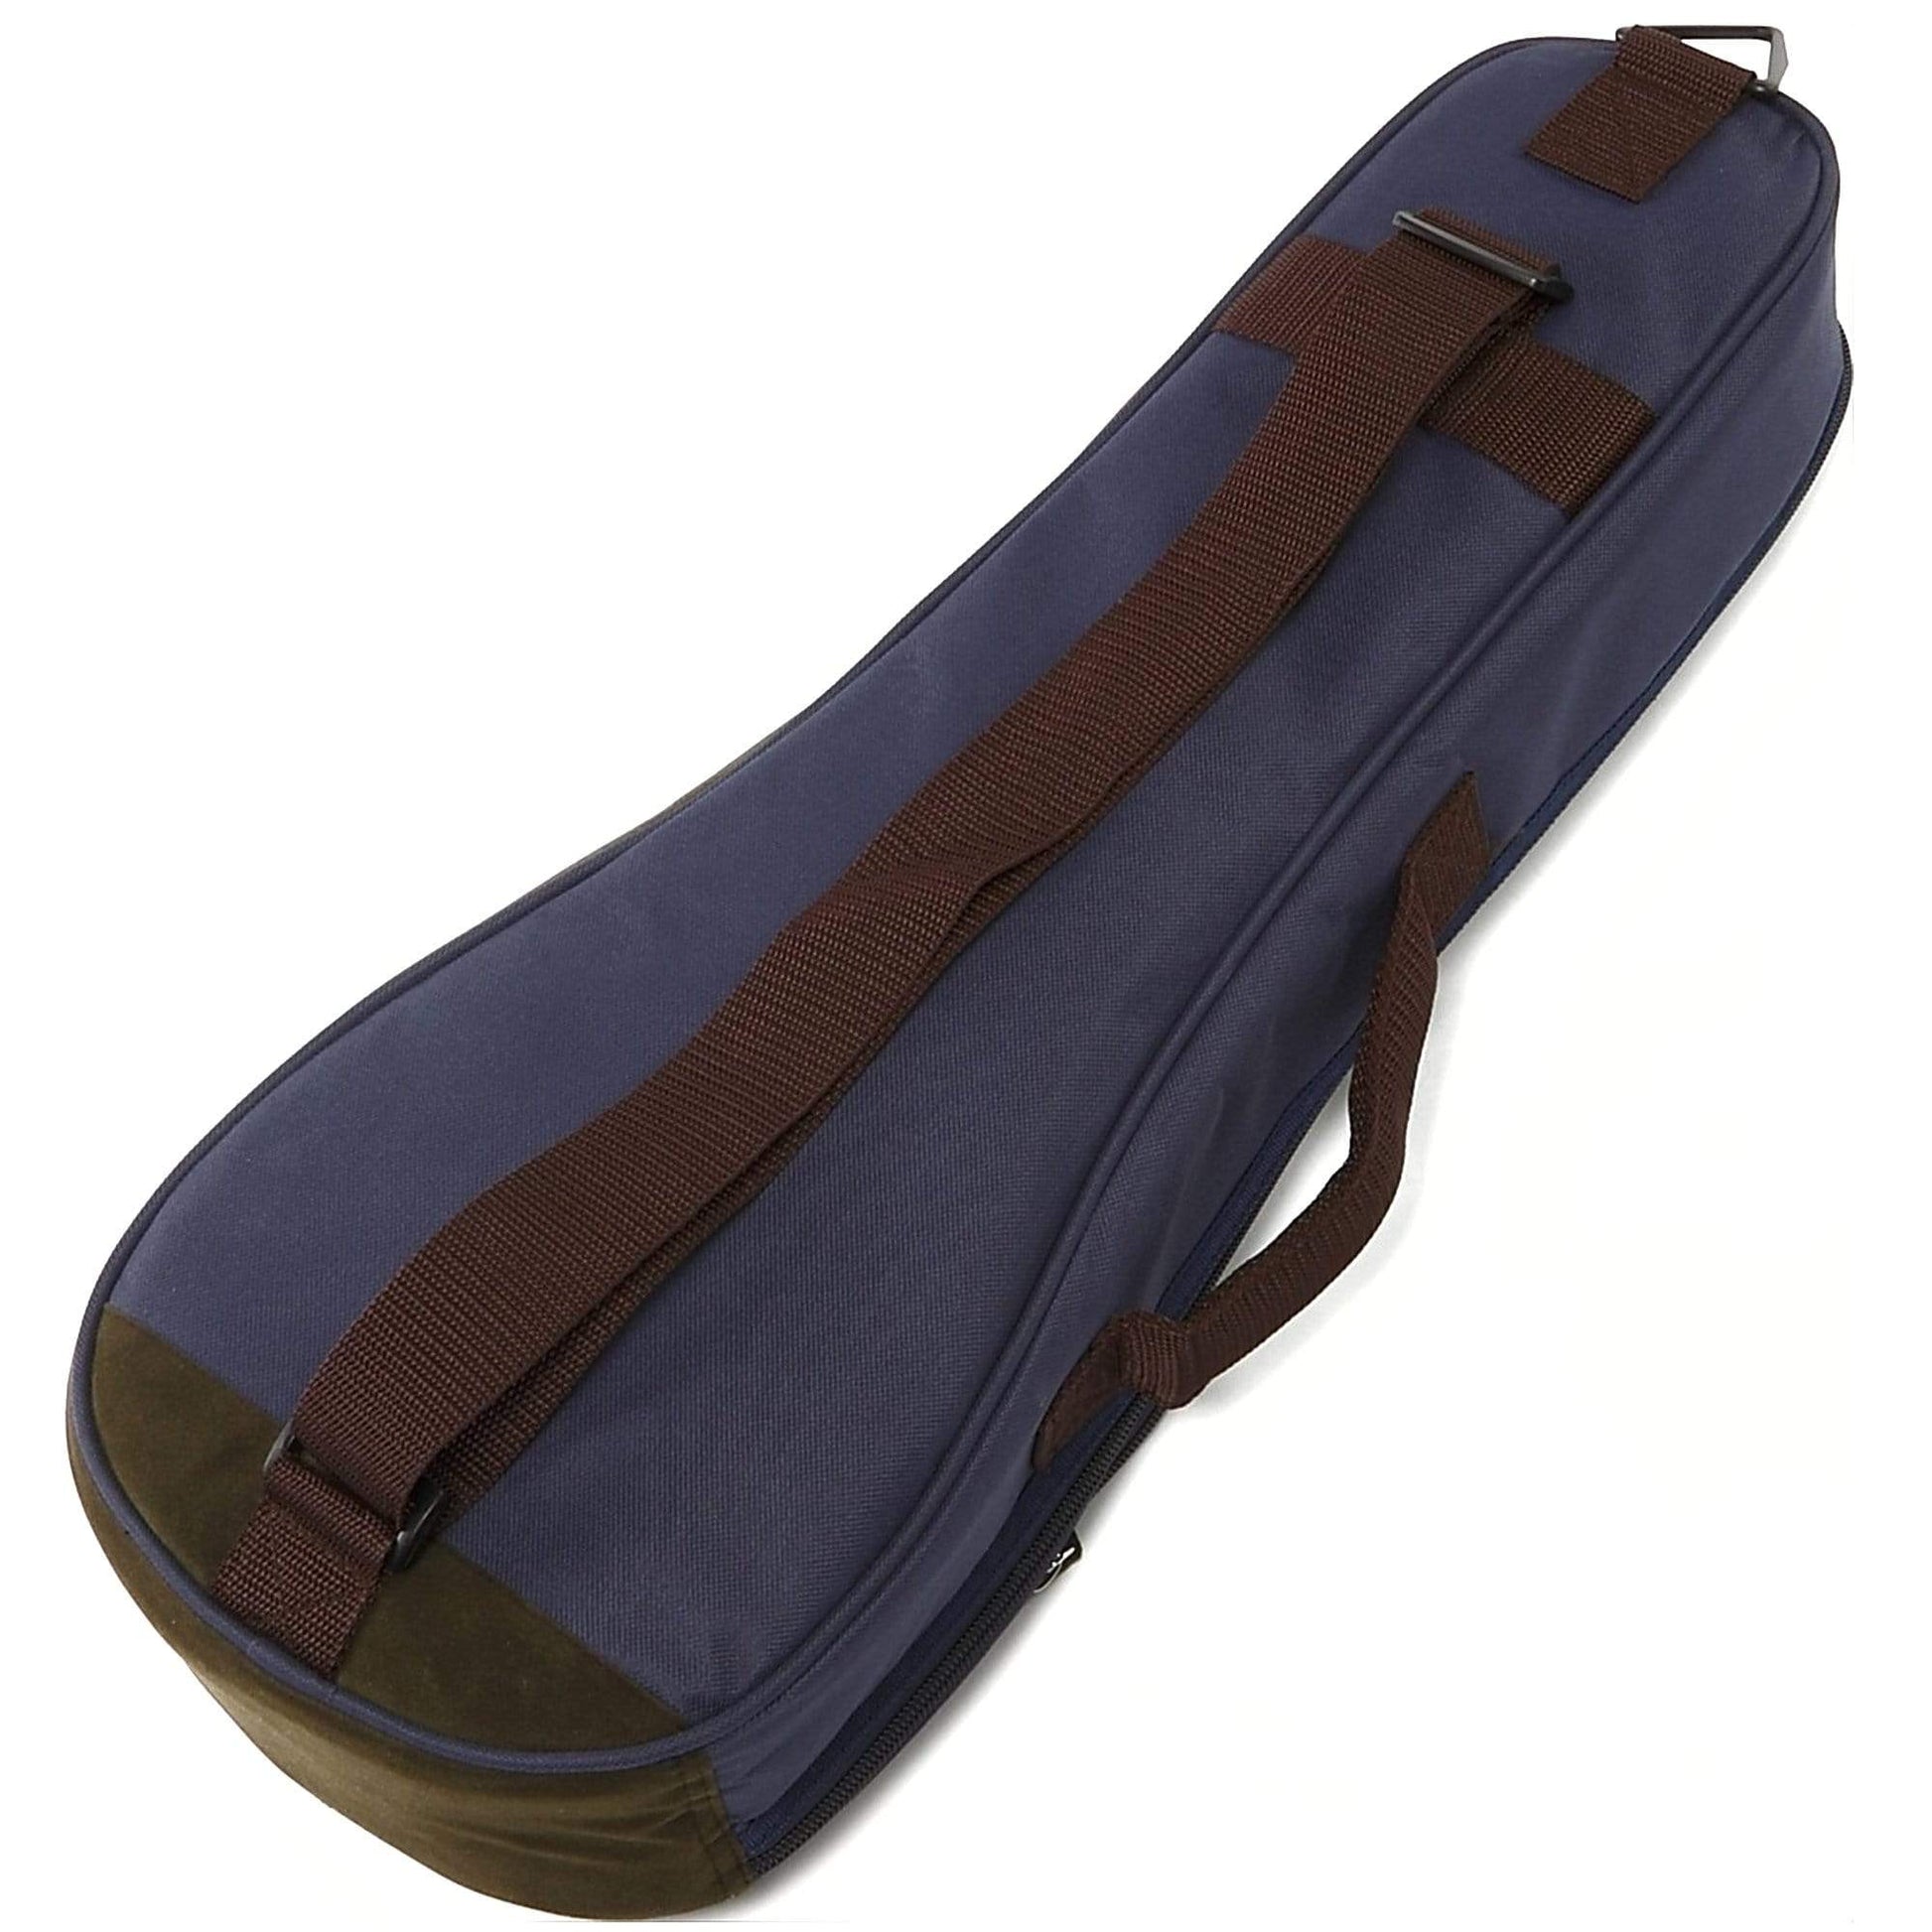 Ibanez Powerpad Gig Bag for Ukulele Soprano Navy Blue Accessories / Cases and Gig Bags / Guitar Gig Bags